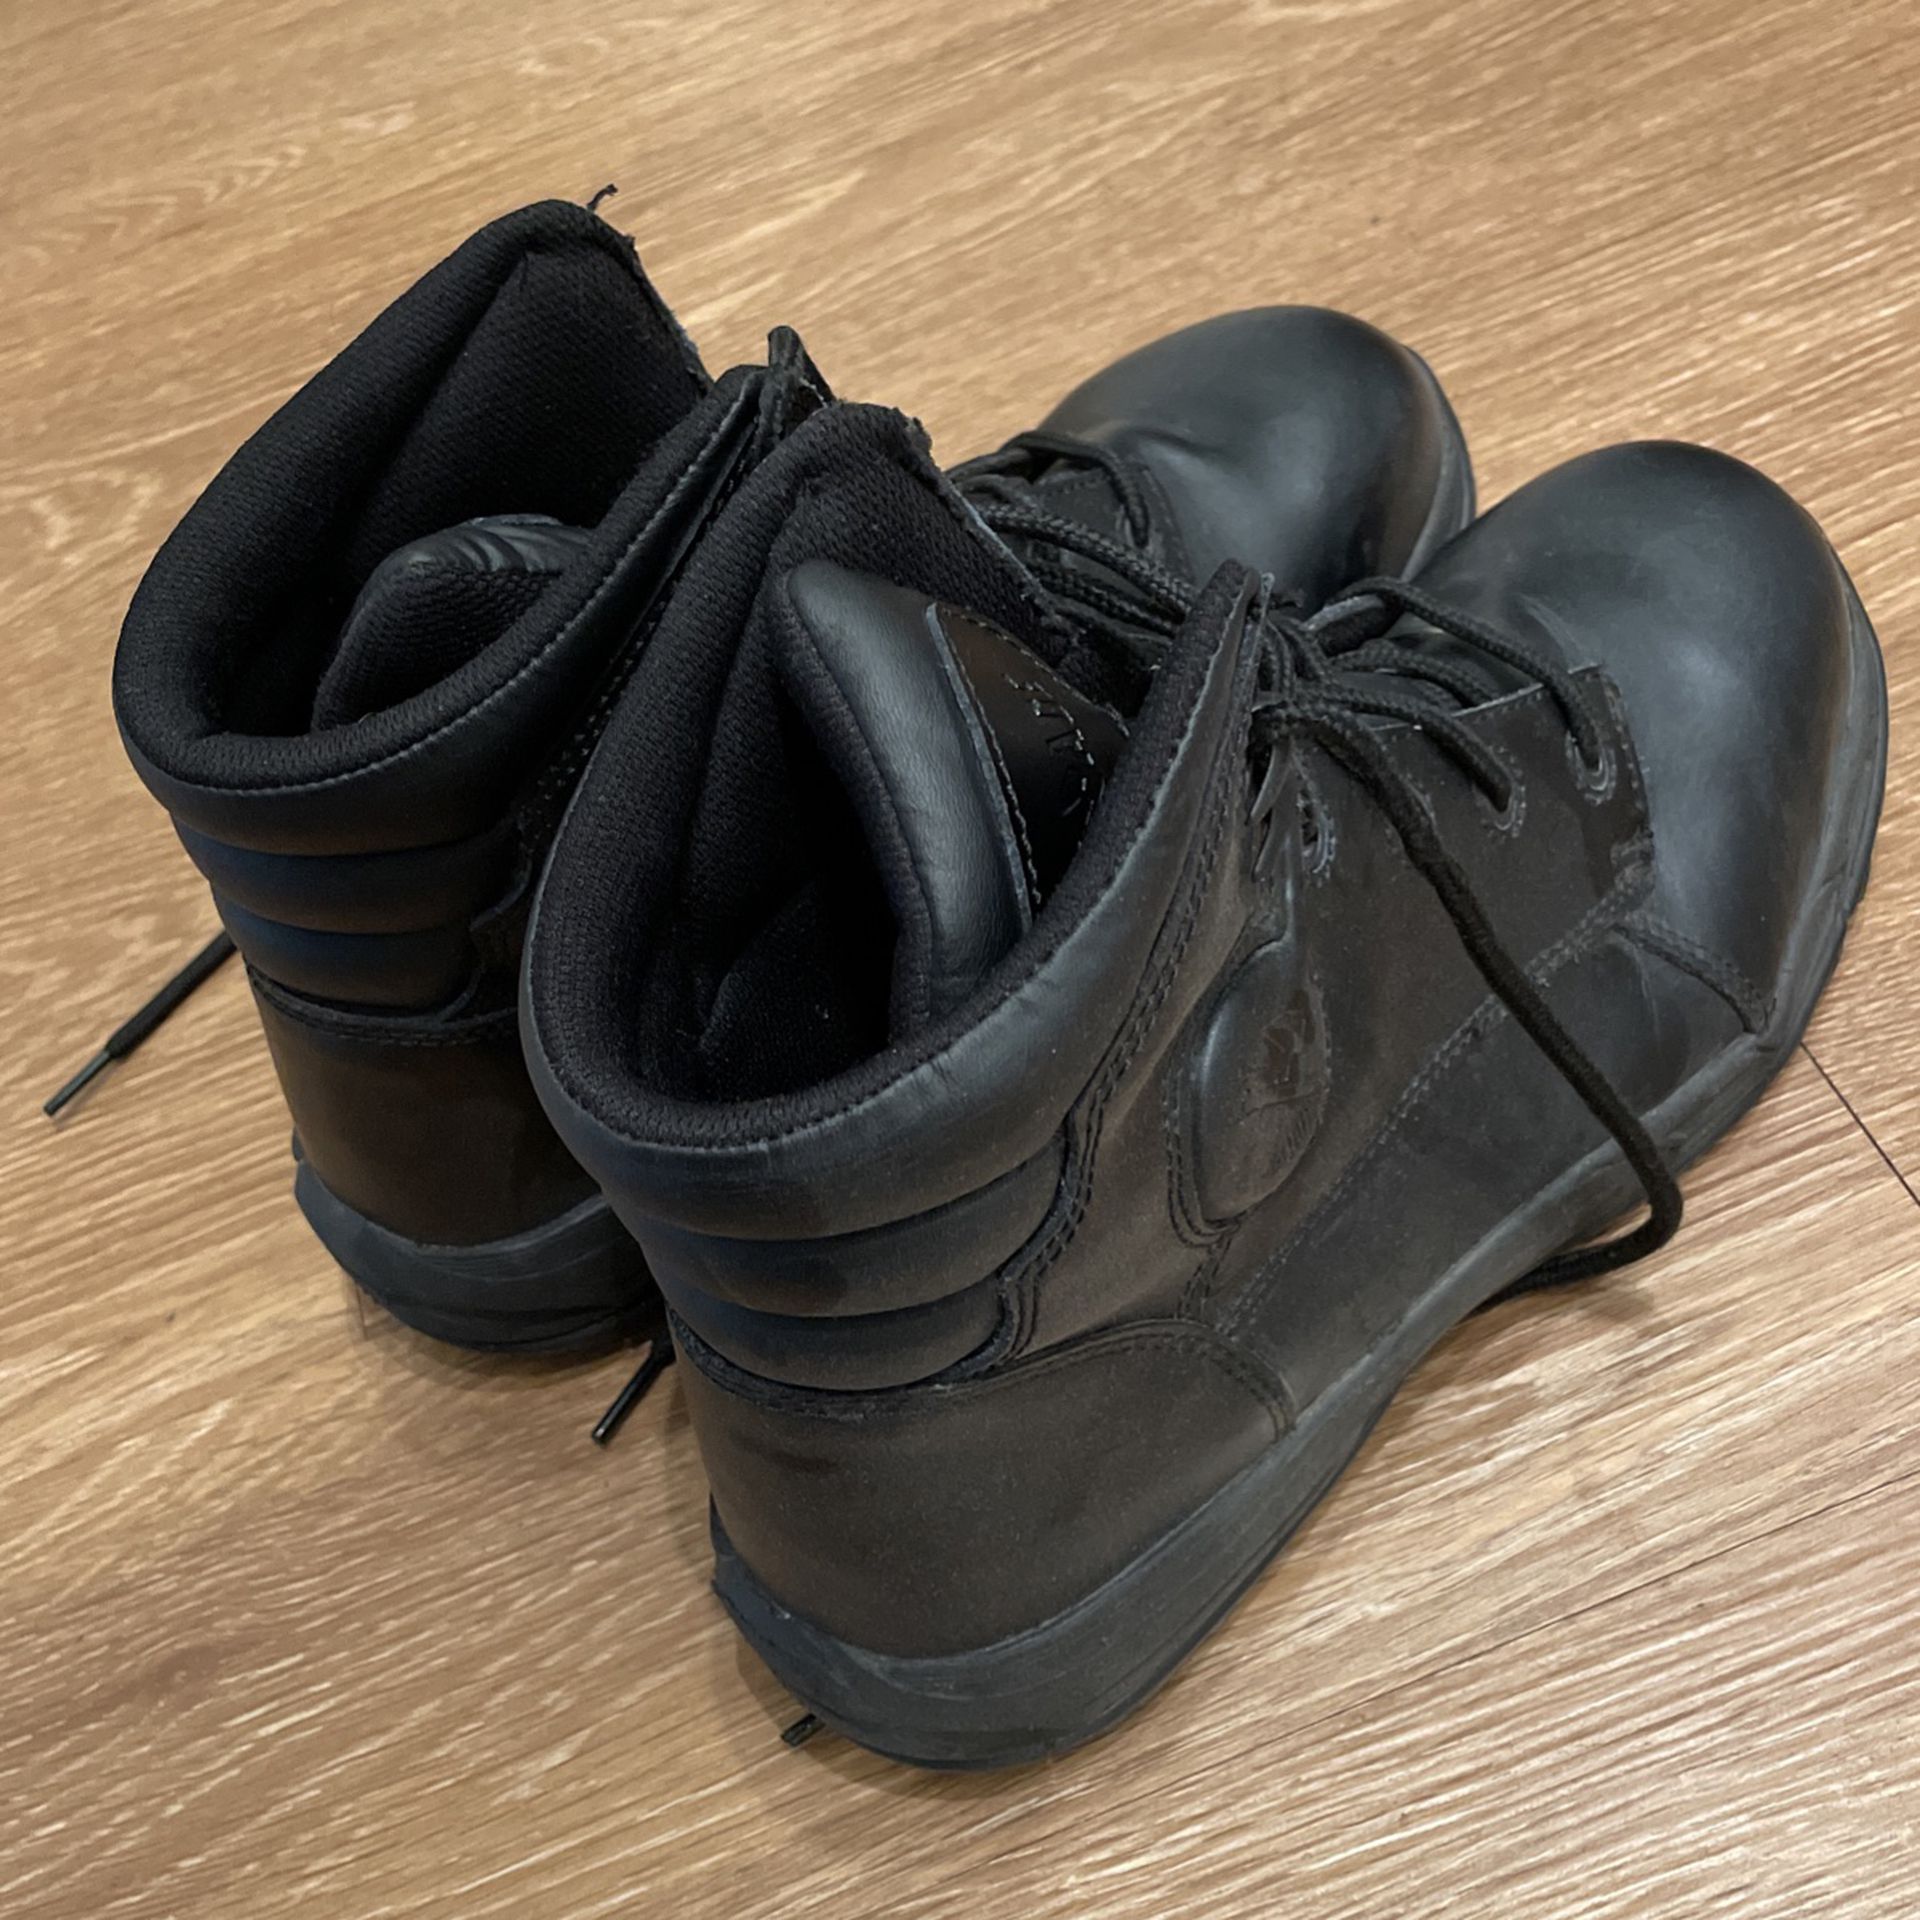 Black Work Boots Size 11